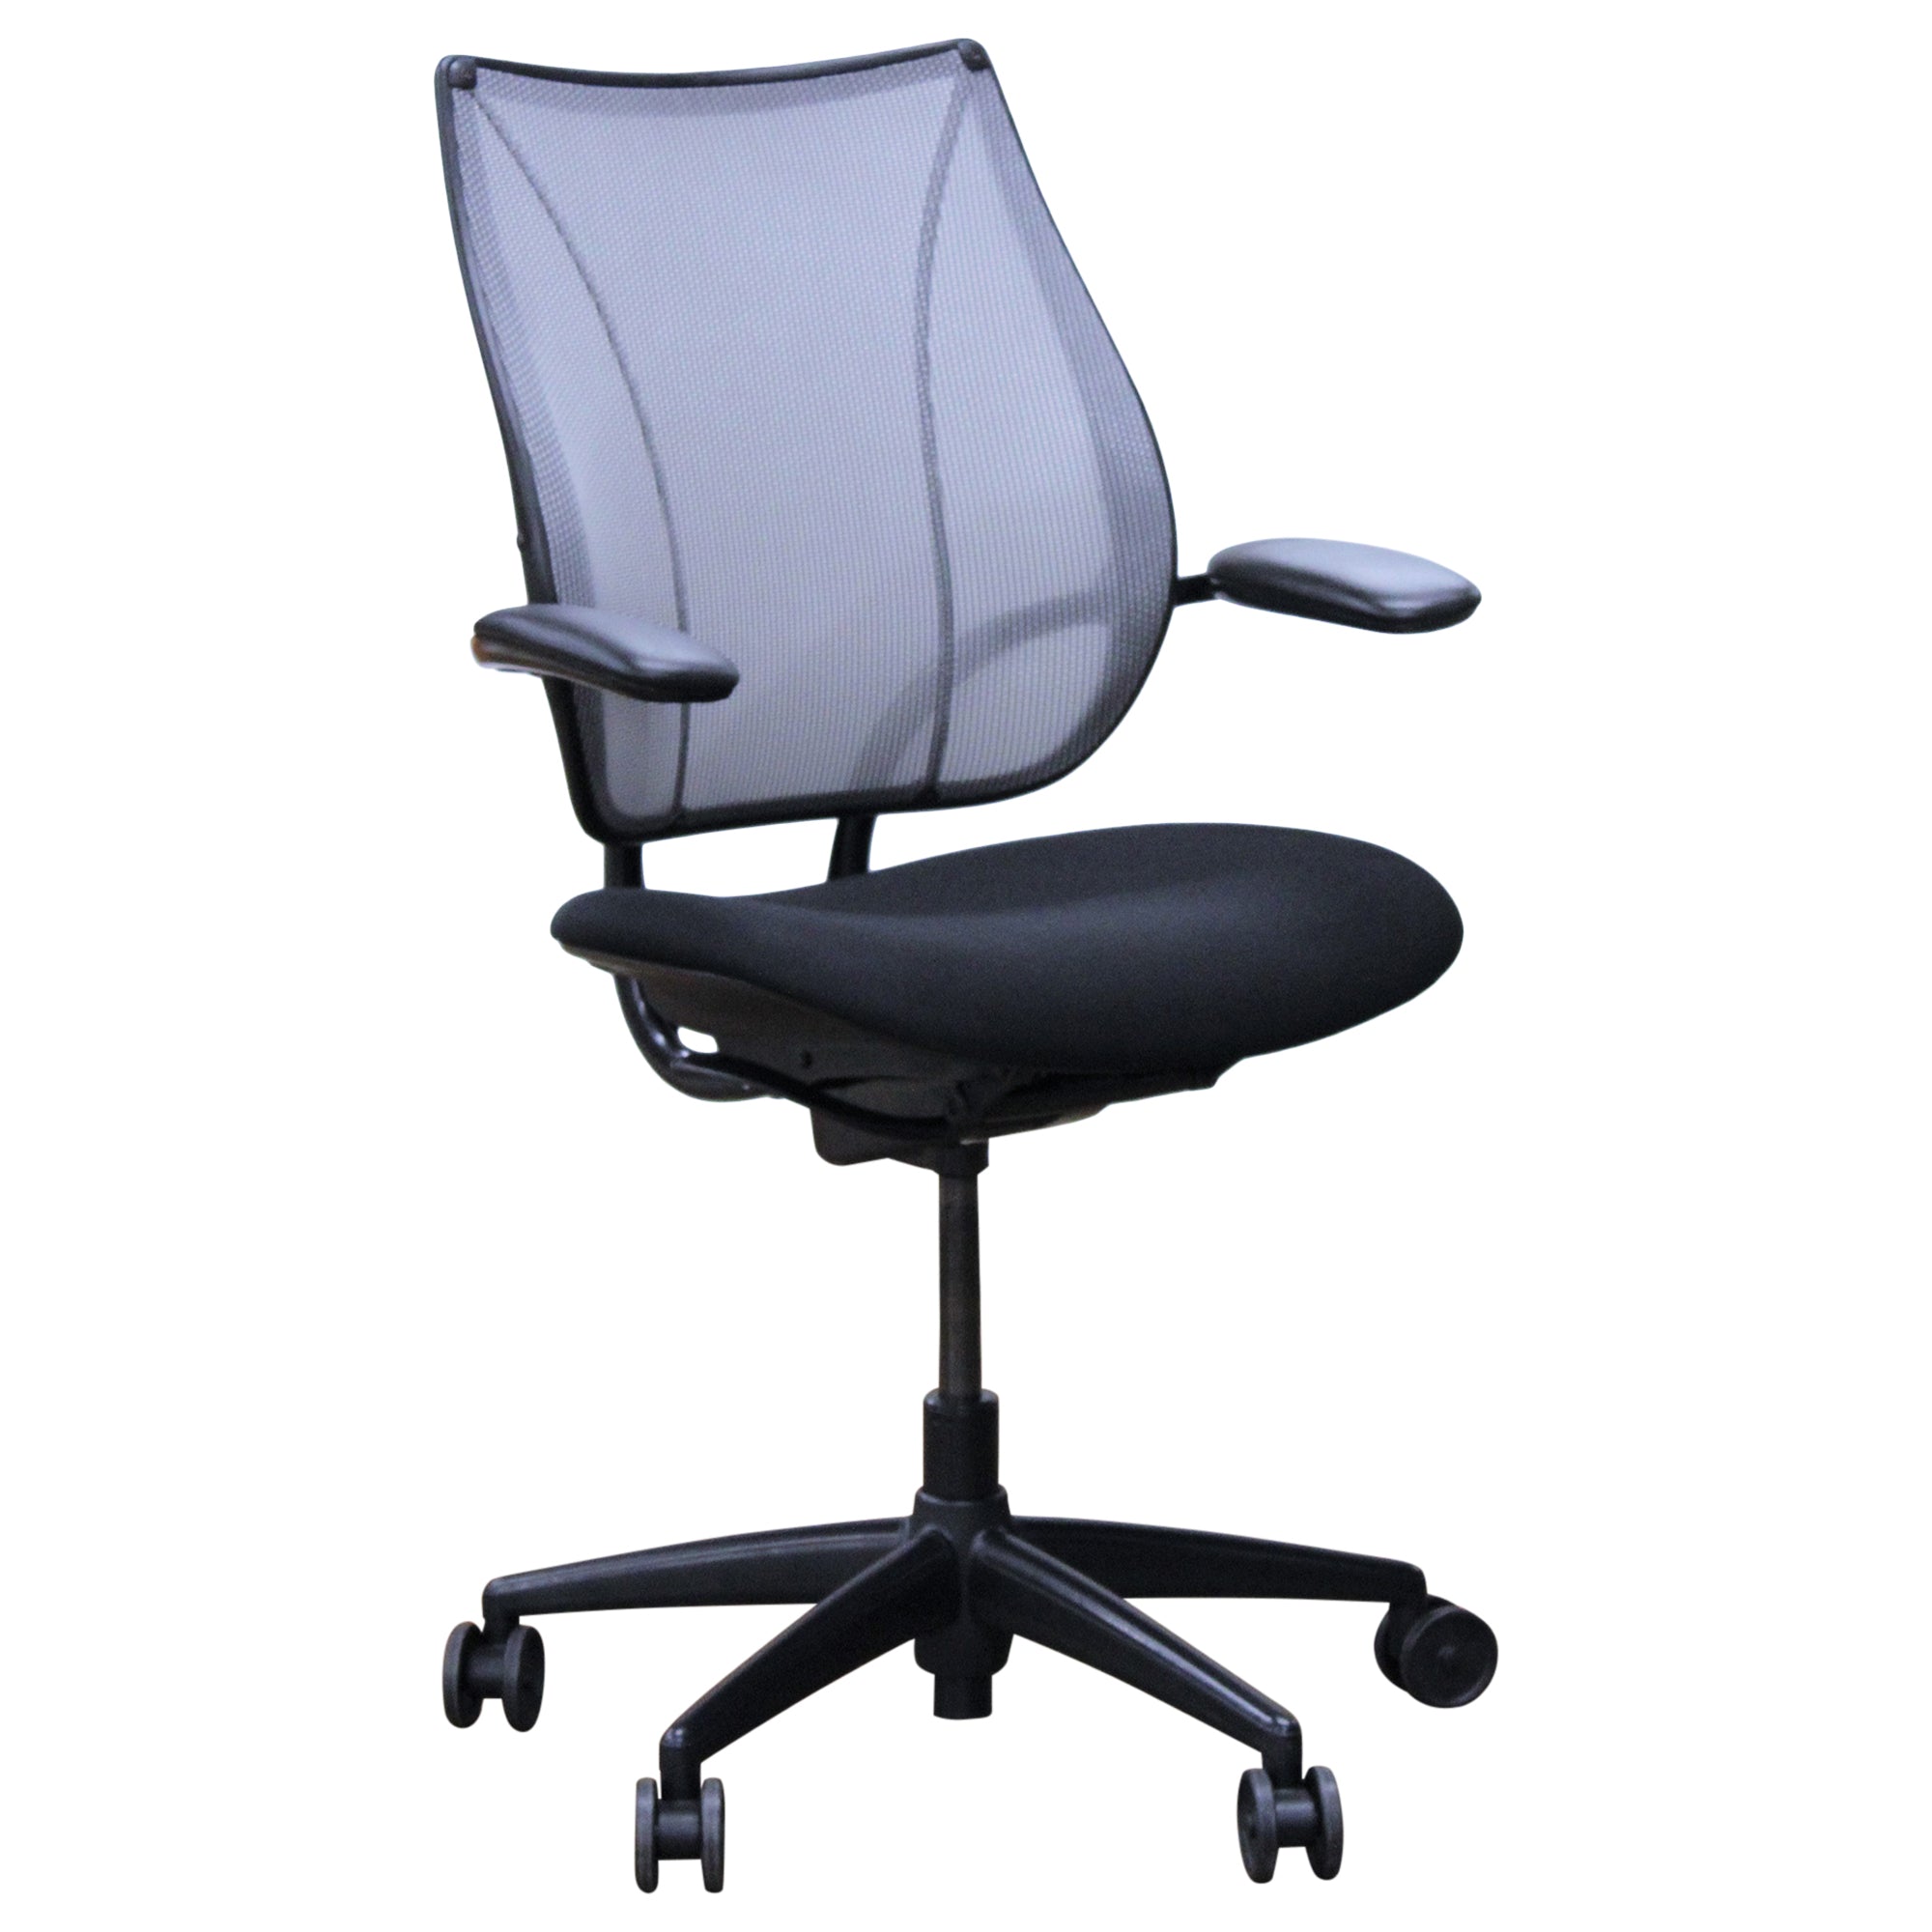 Humanscale Liberty Task Chair, Grey Mesh - Preowned